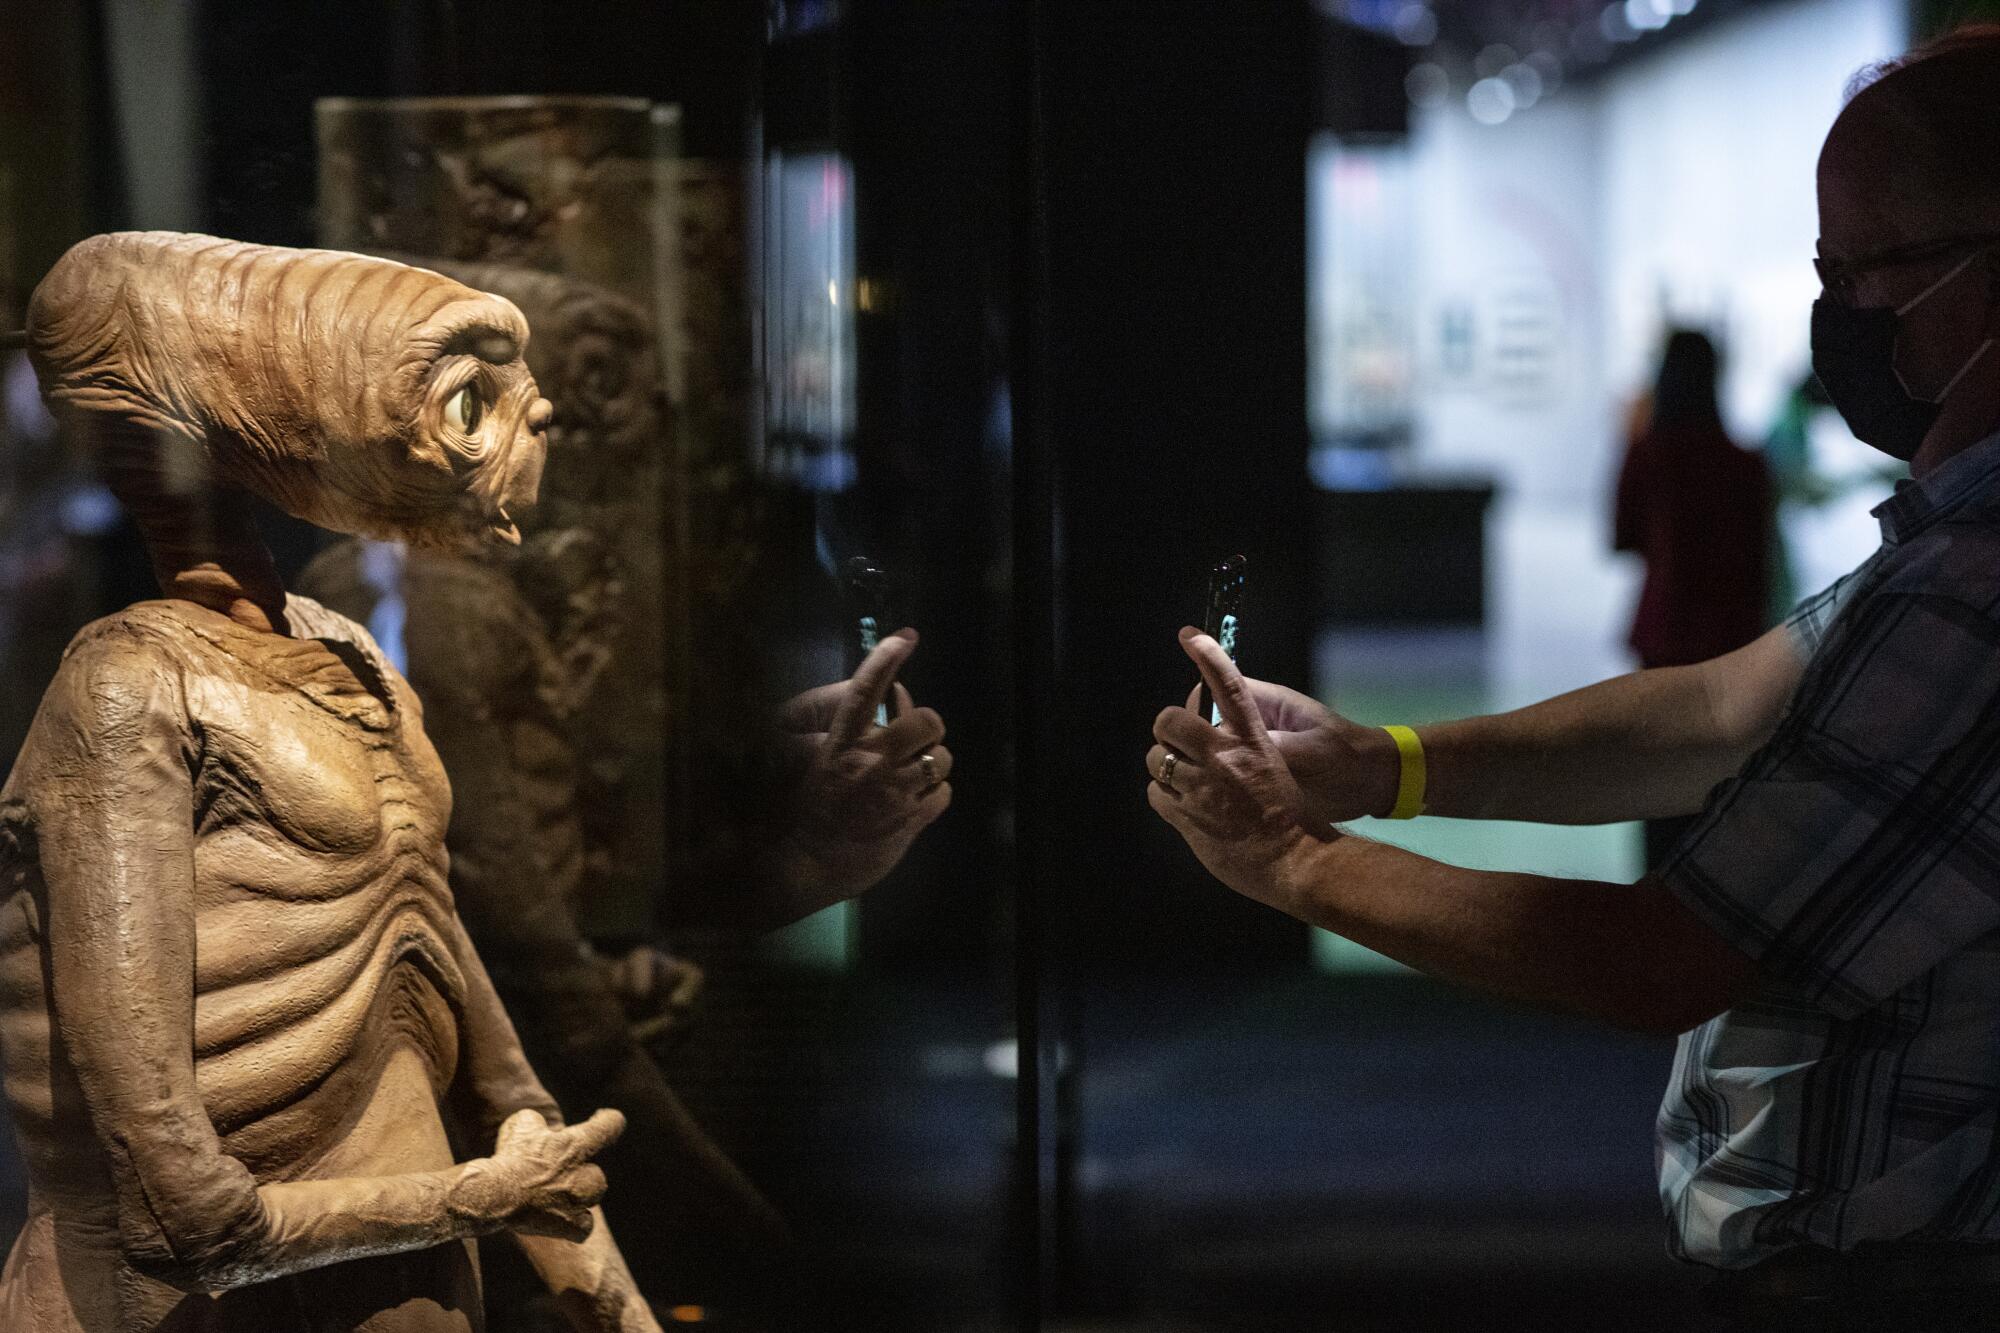 A person holds a phone up to a glass case holding ET from "E.T."